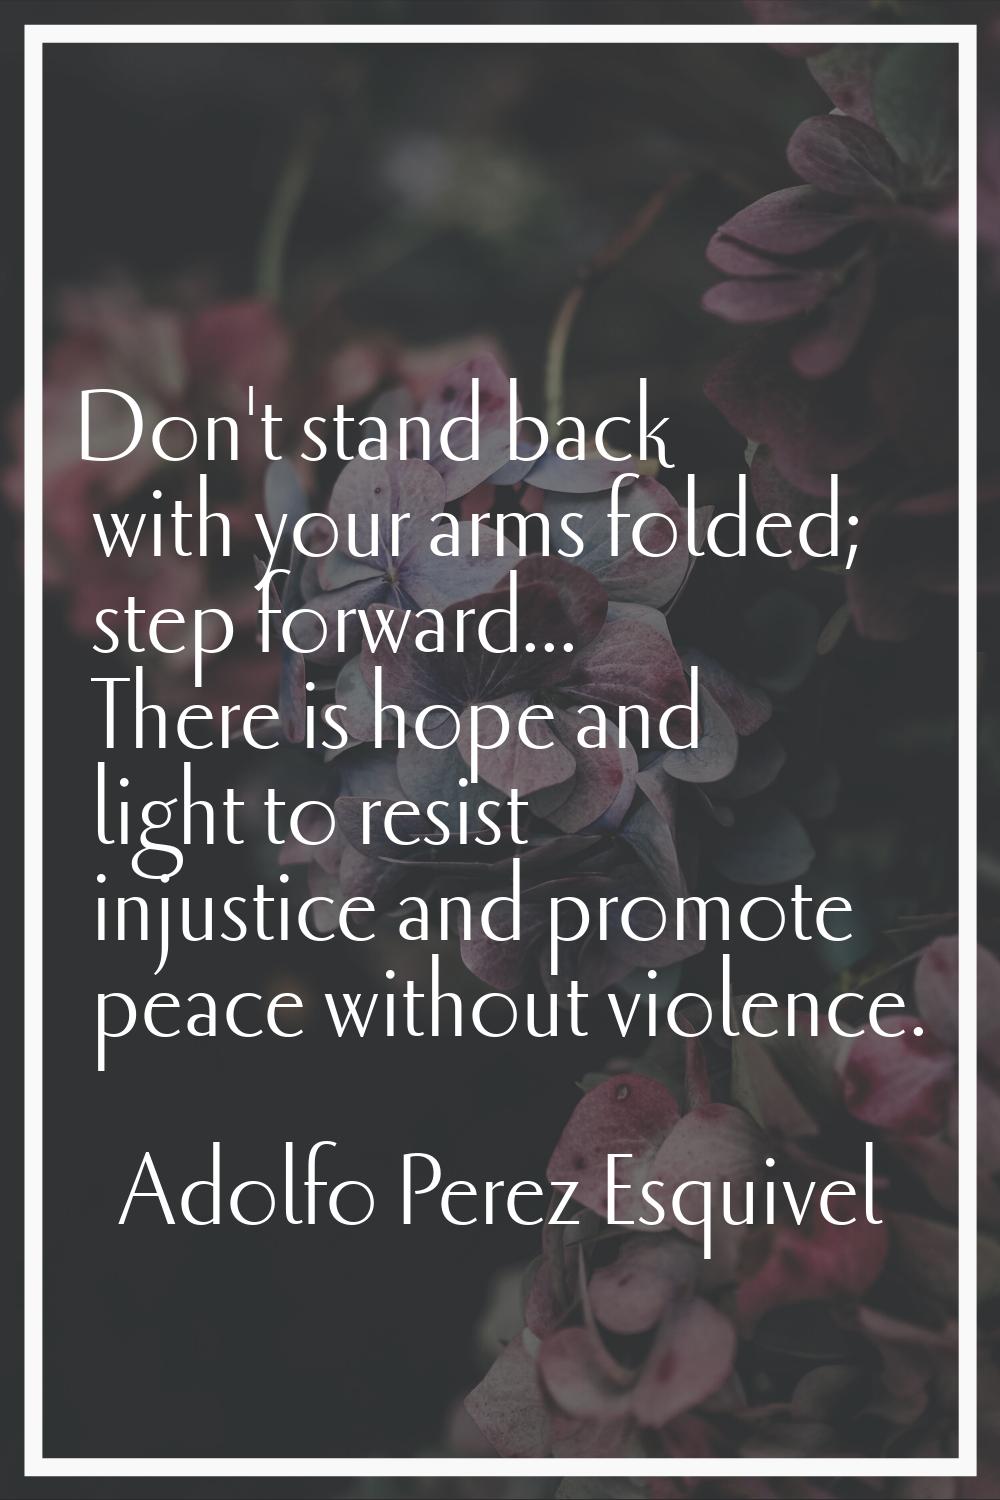 Don't stand back with your arms folded; step forward... There is hope and light to resist injustice